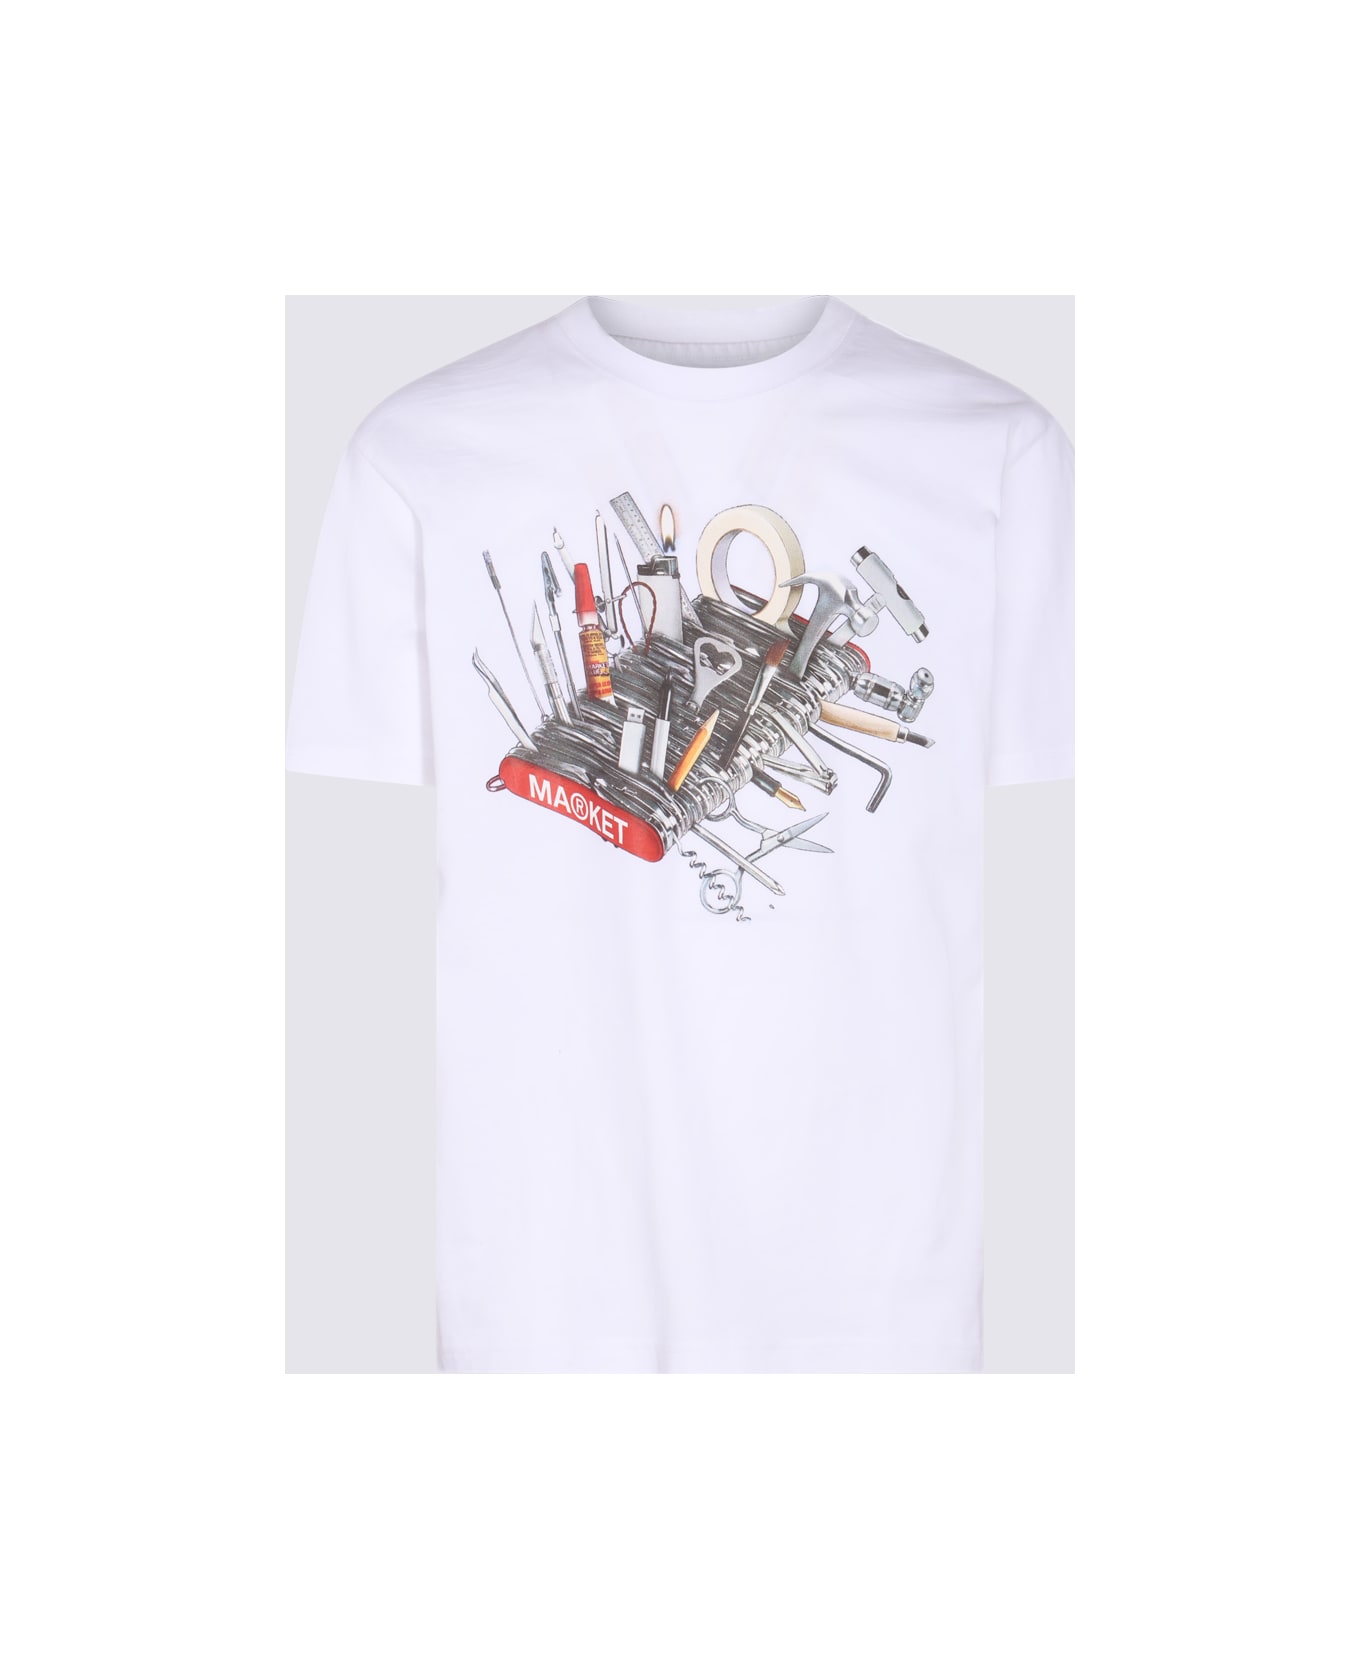 Market White Cotton Tools Of The Trade T-shirt シャツ